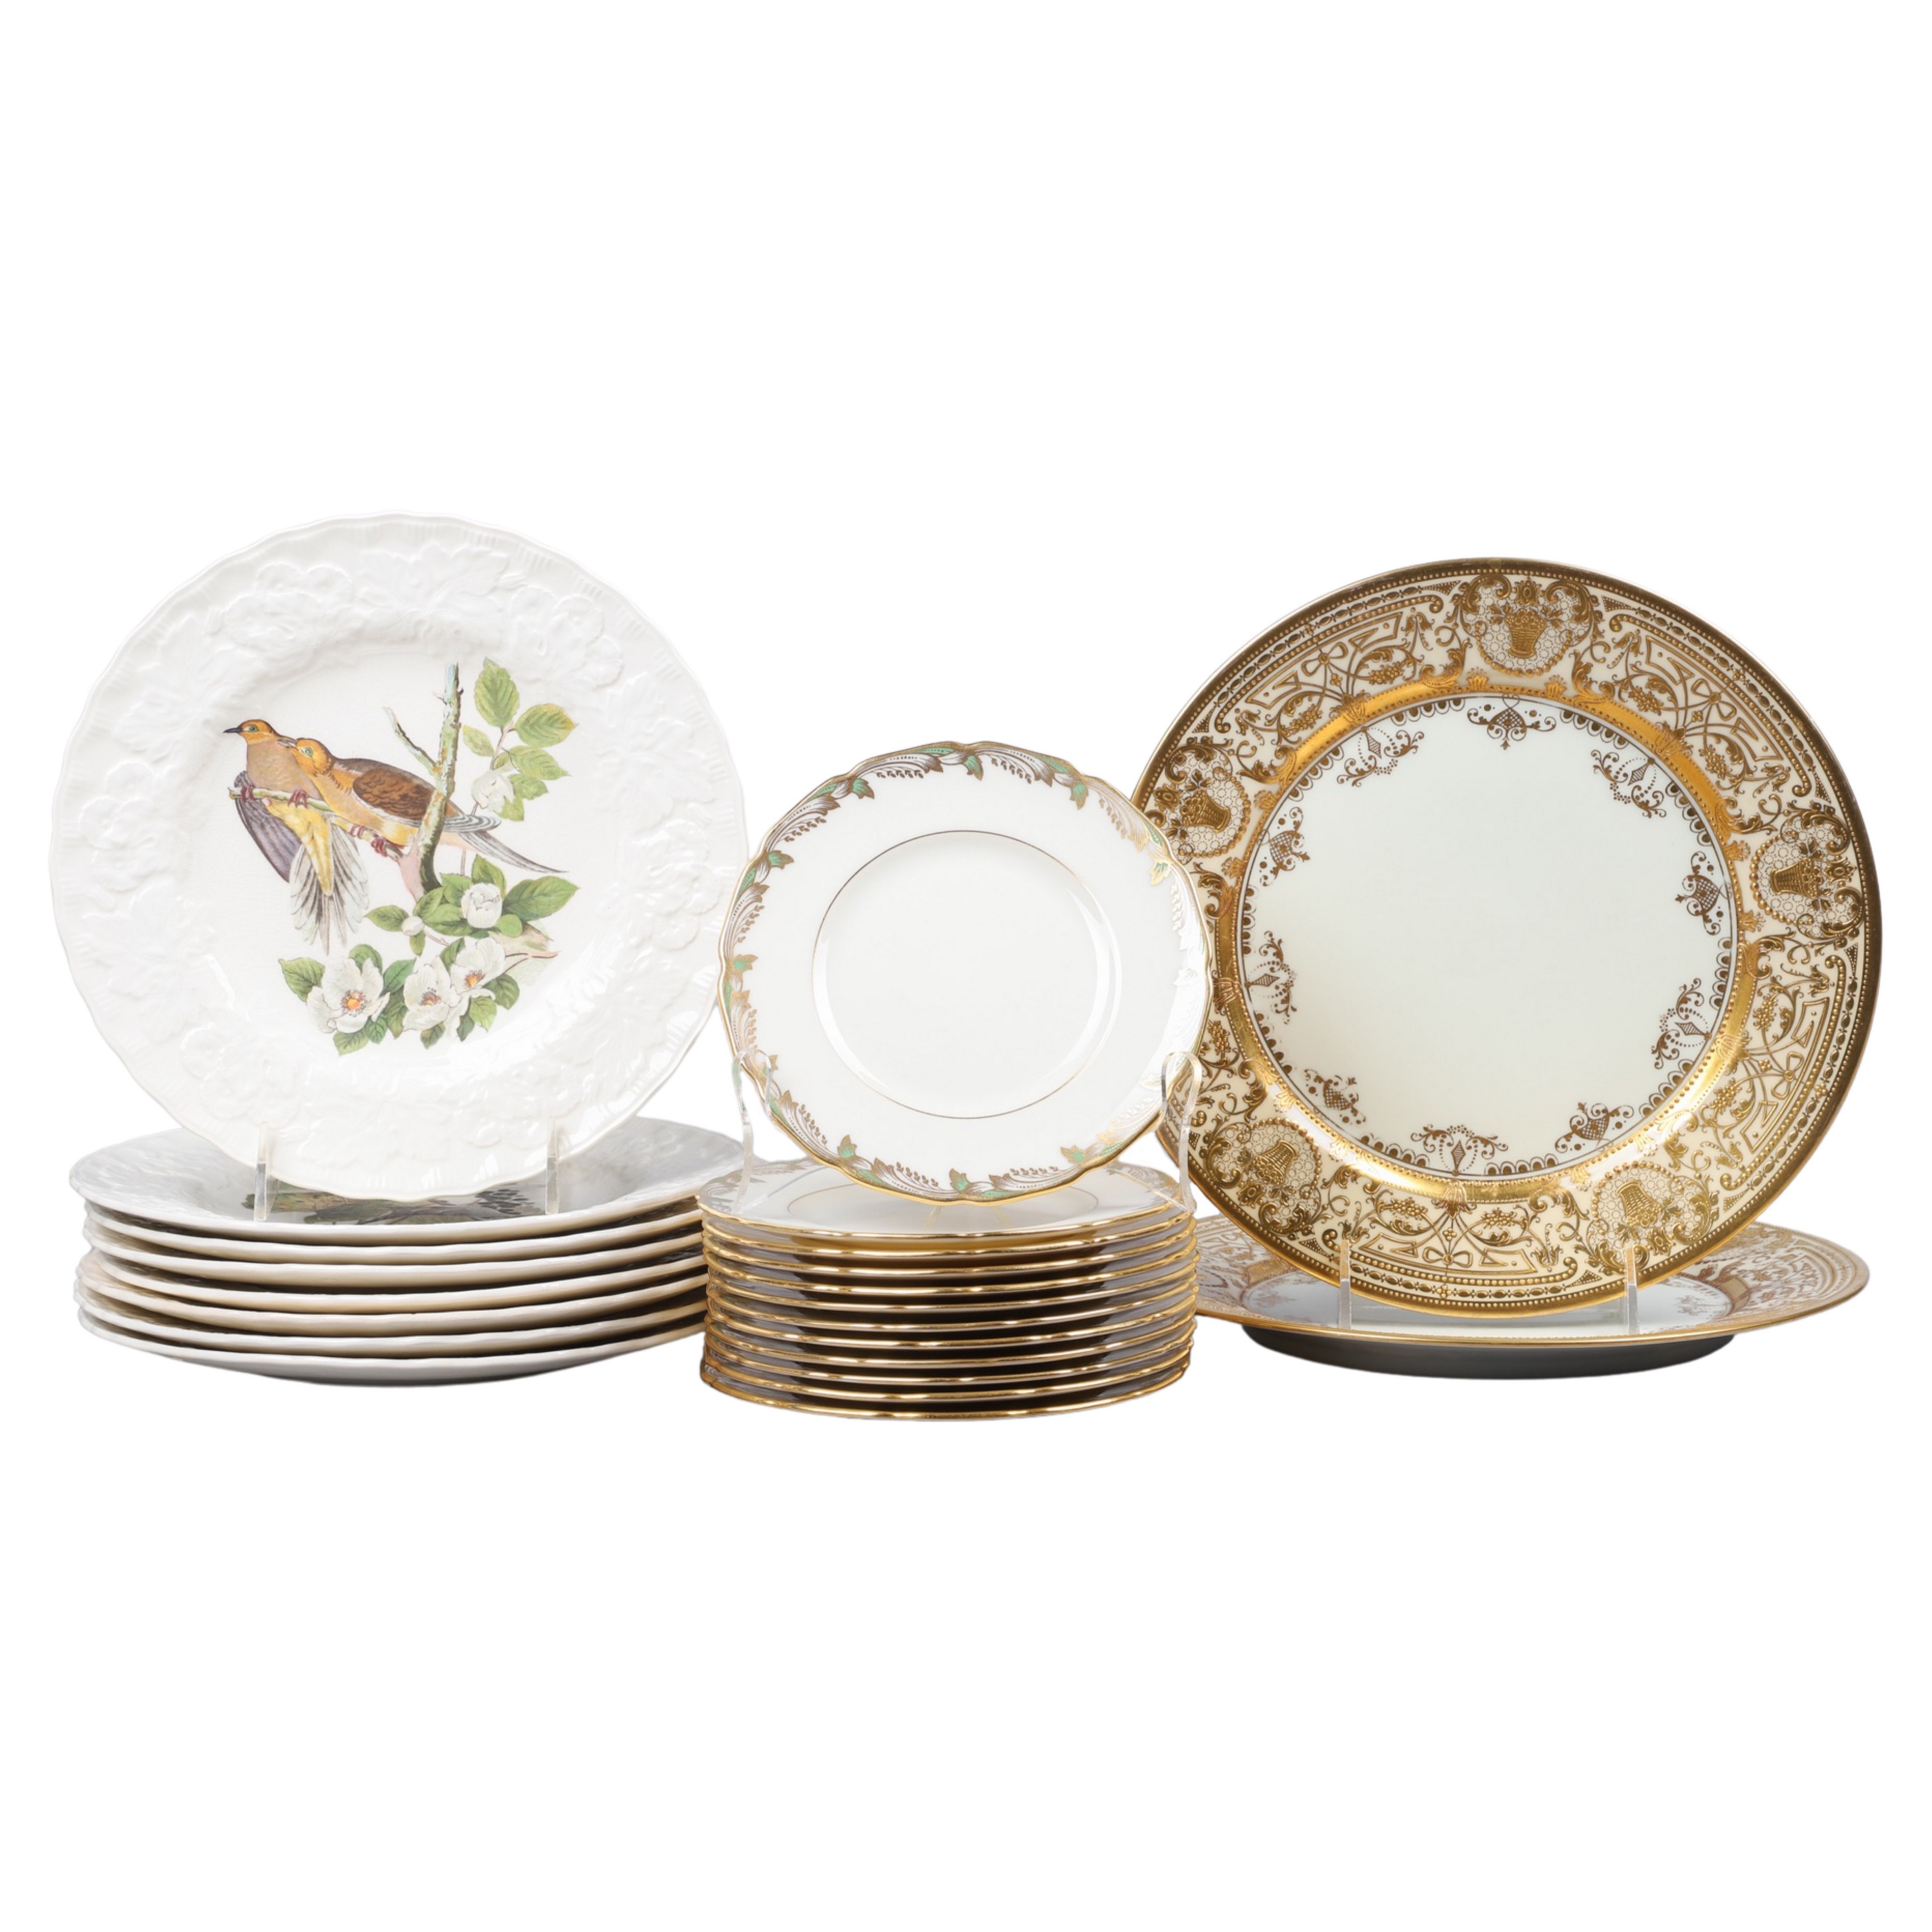 Porcelain plate grouping to include 30ff8c